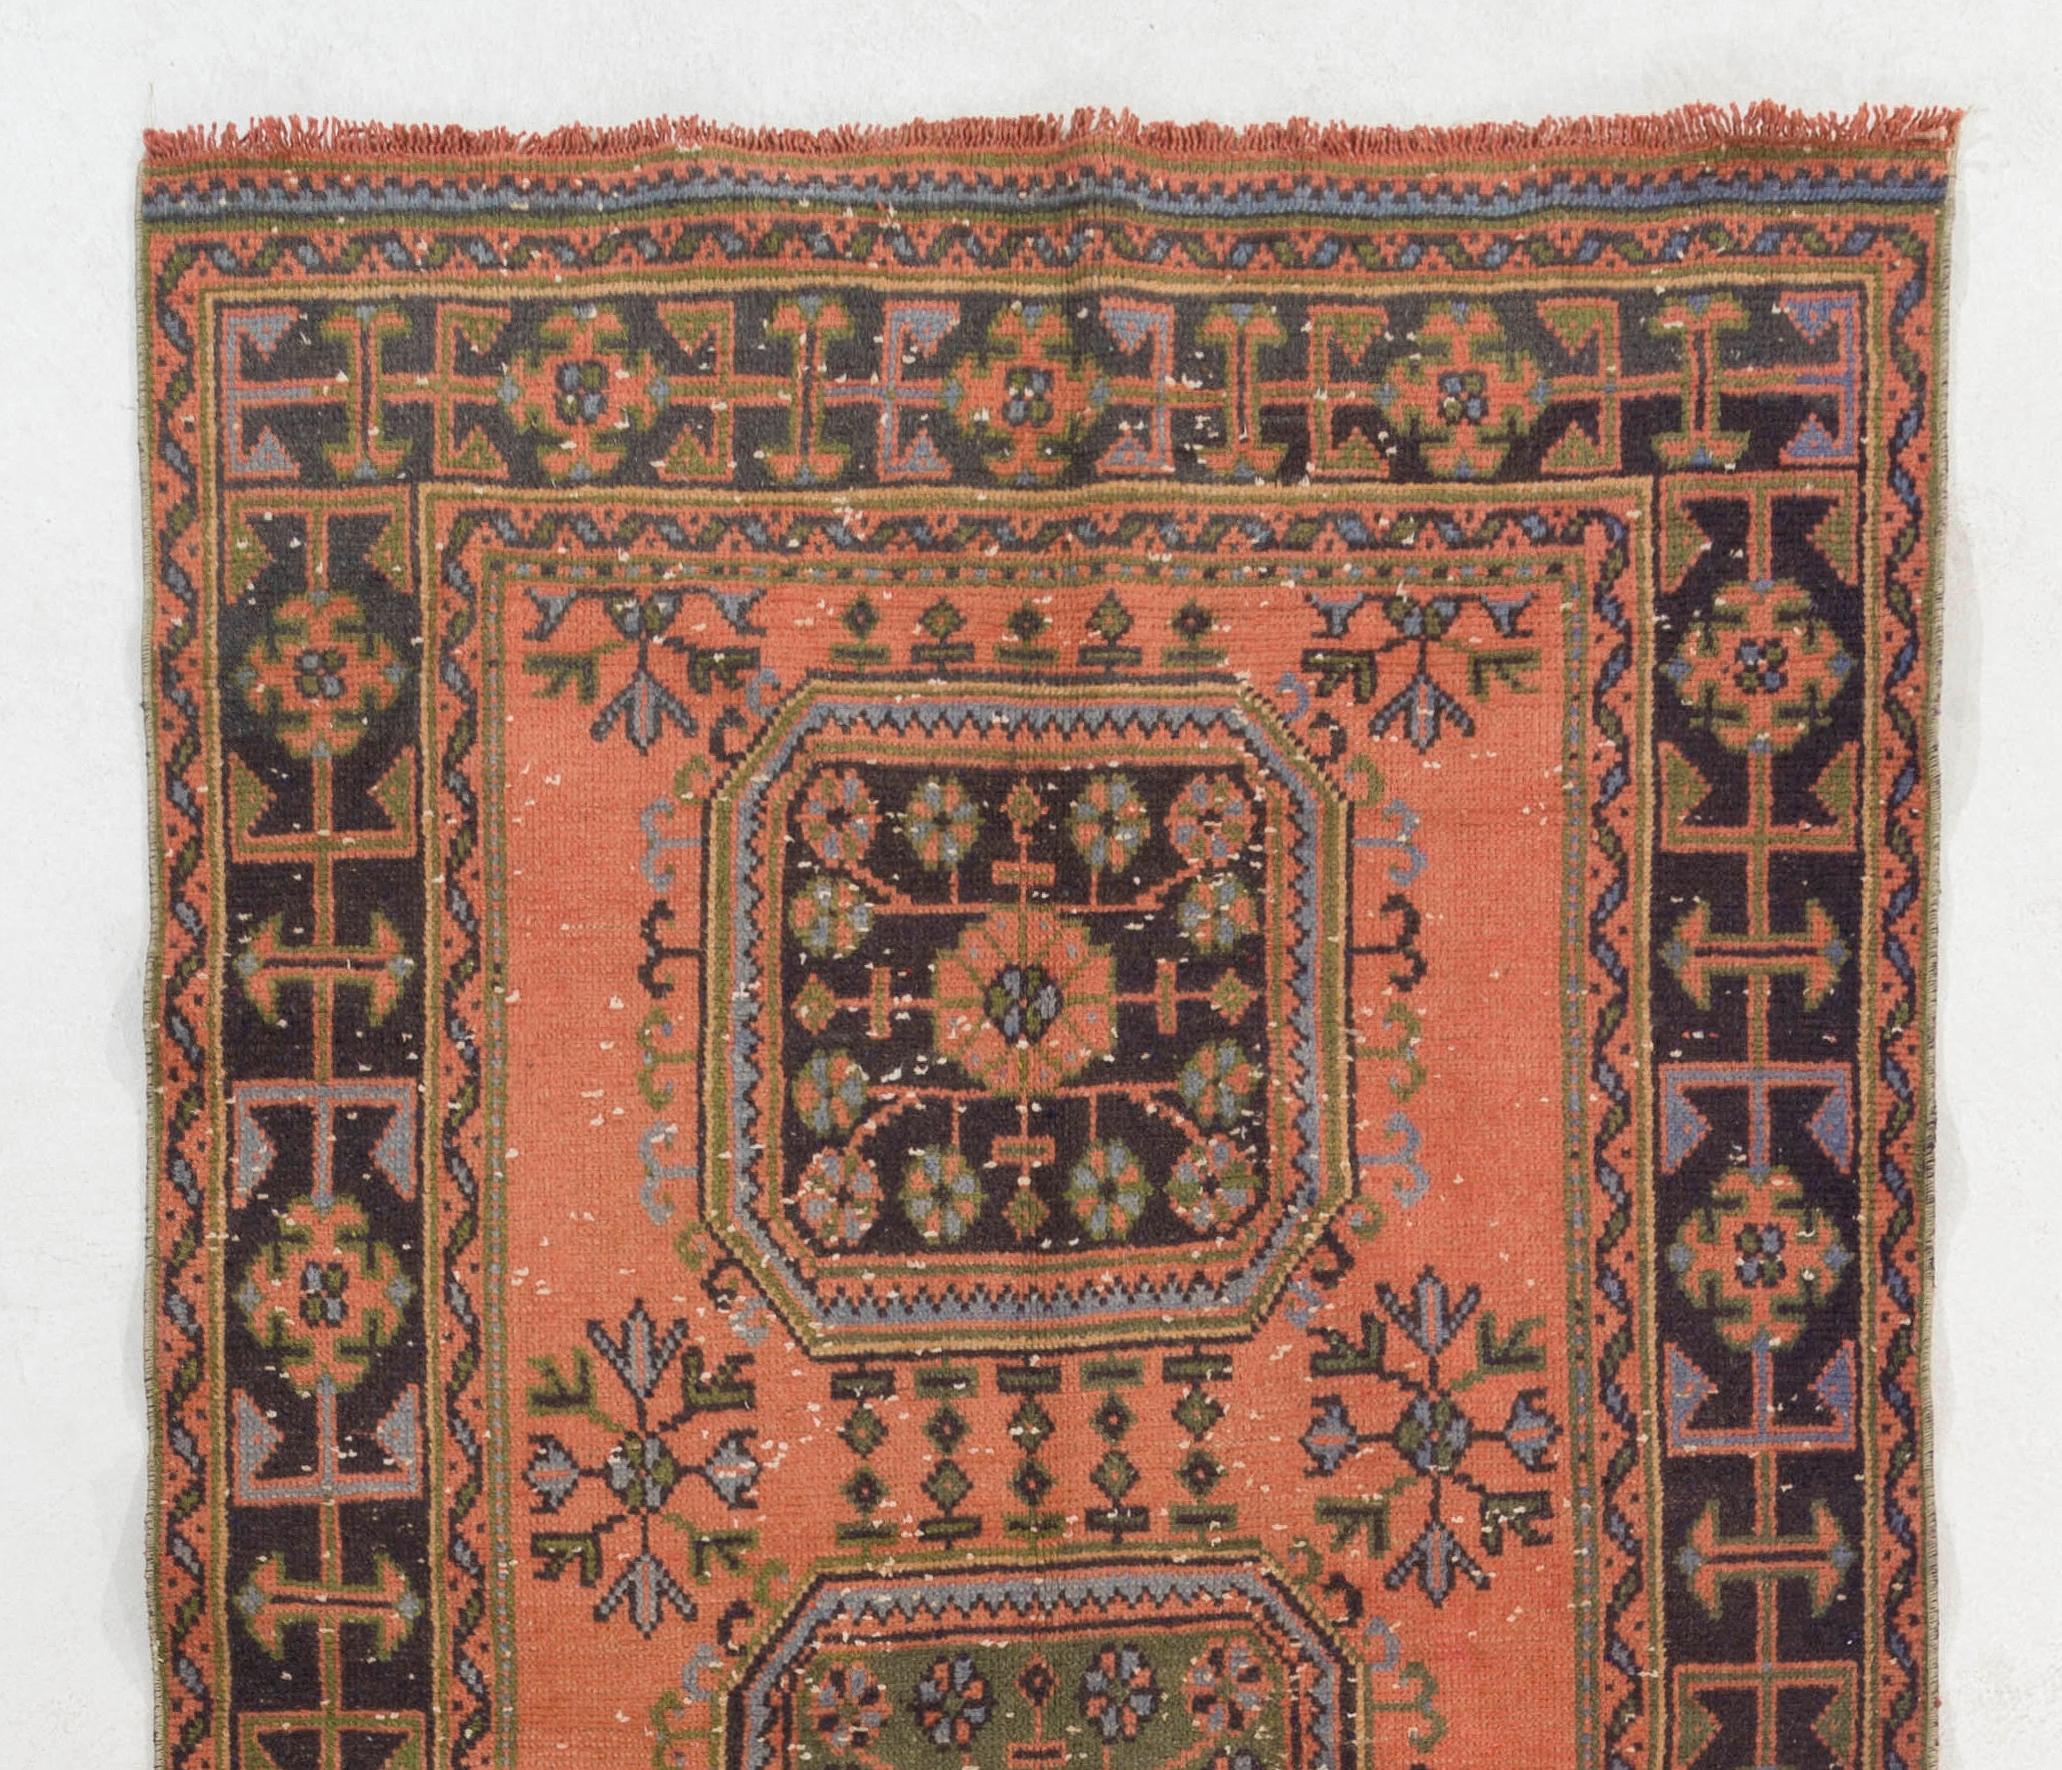 A vintage Turkish runner rug. Hand-knotted in Turkey in 1960s and multiple geometric medallion design. The rug is in good condition, sturdy and clean as a brand new rug. It can be used in a high traffic area and suitable for both residential and